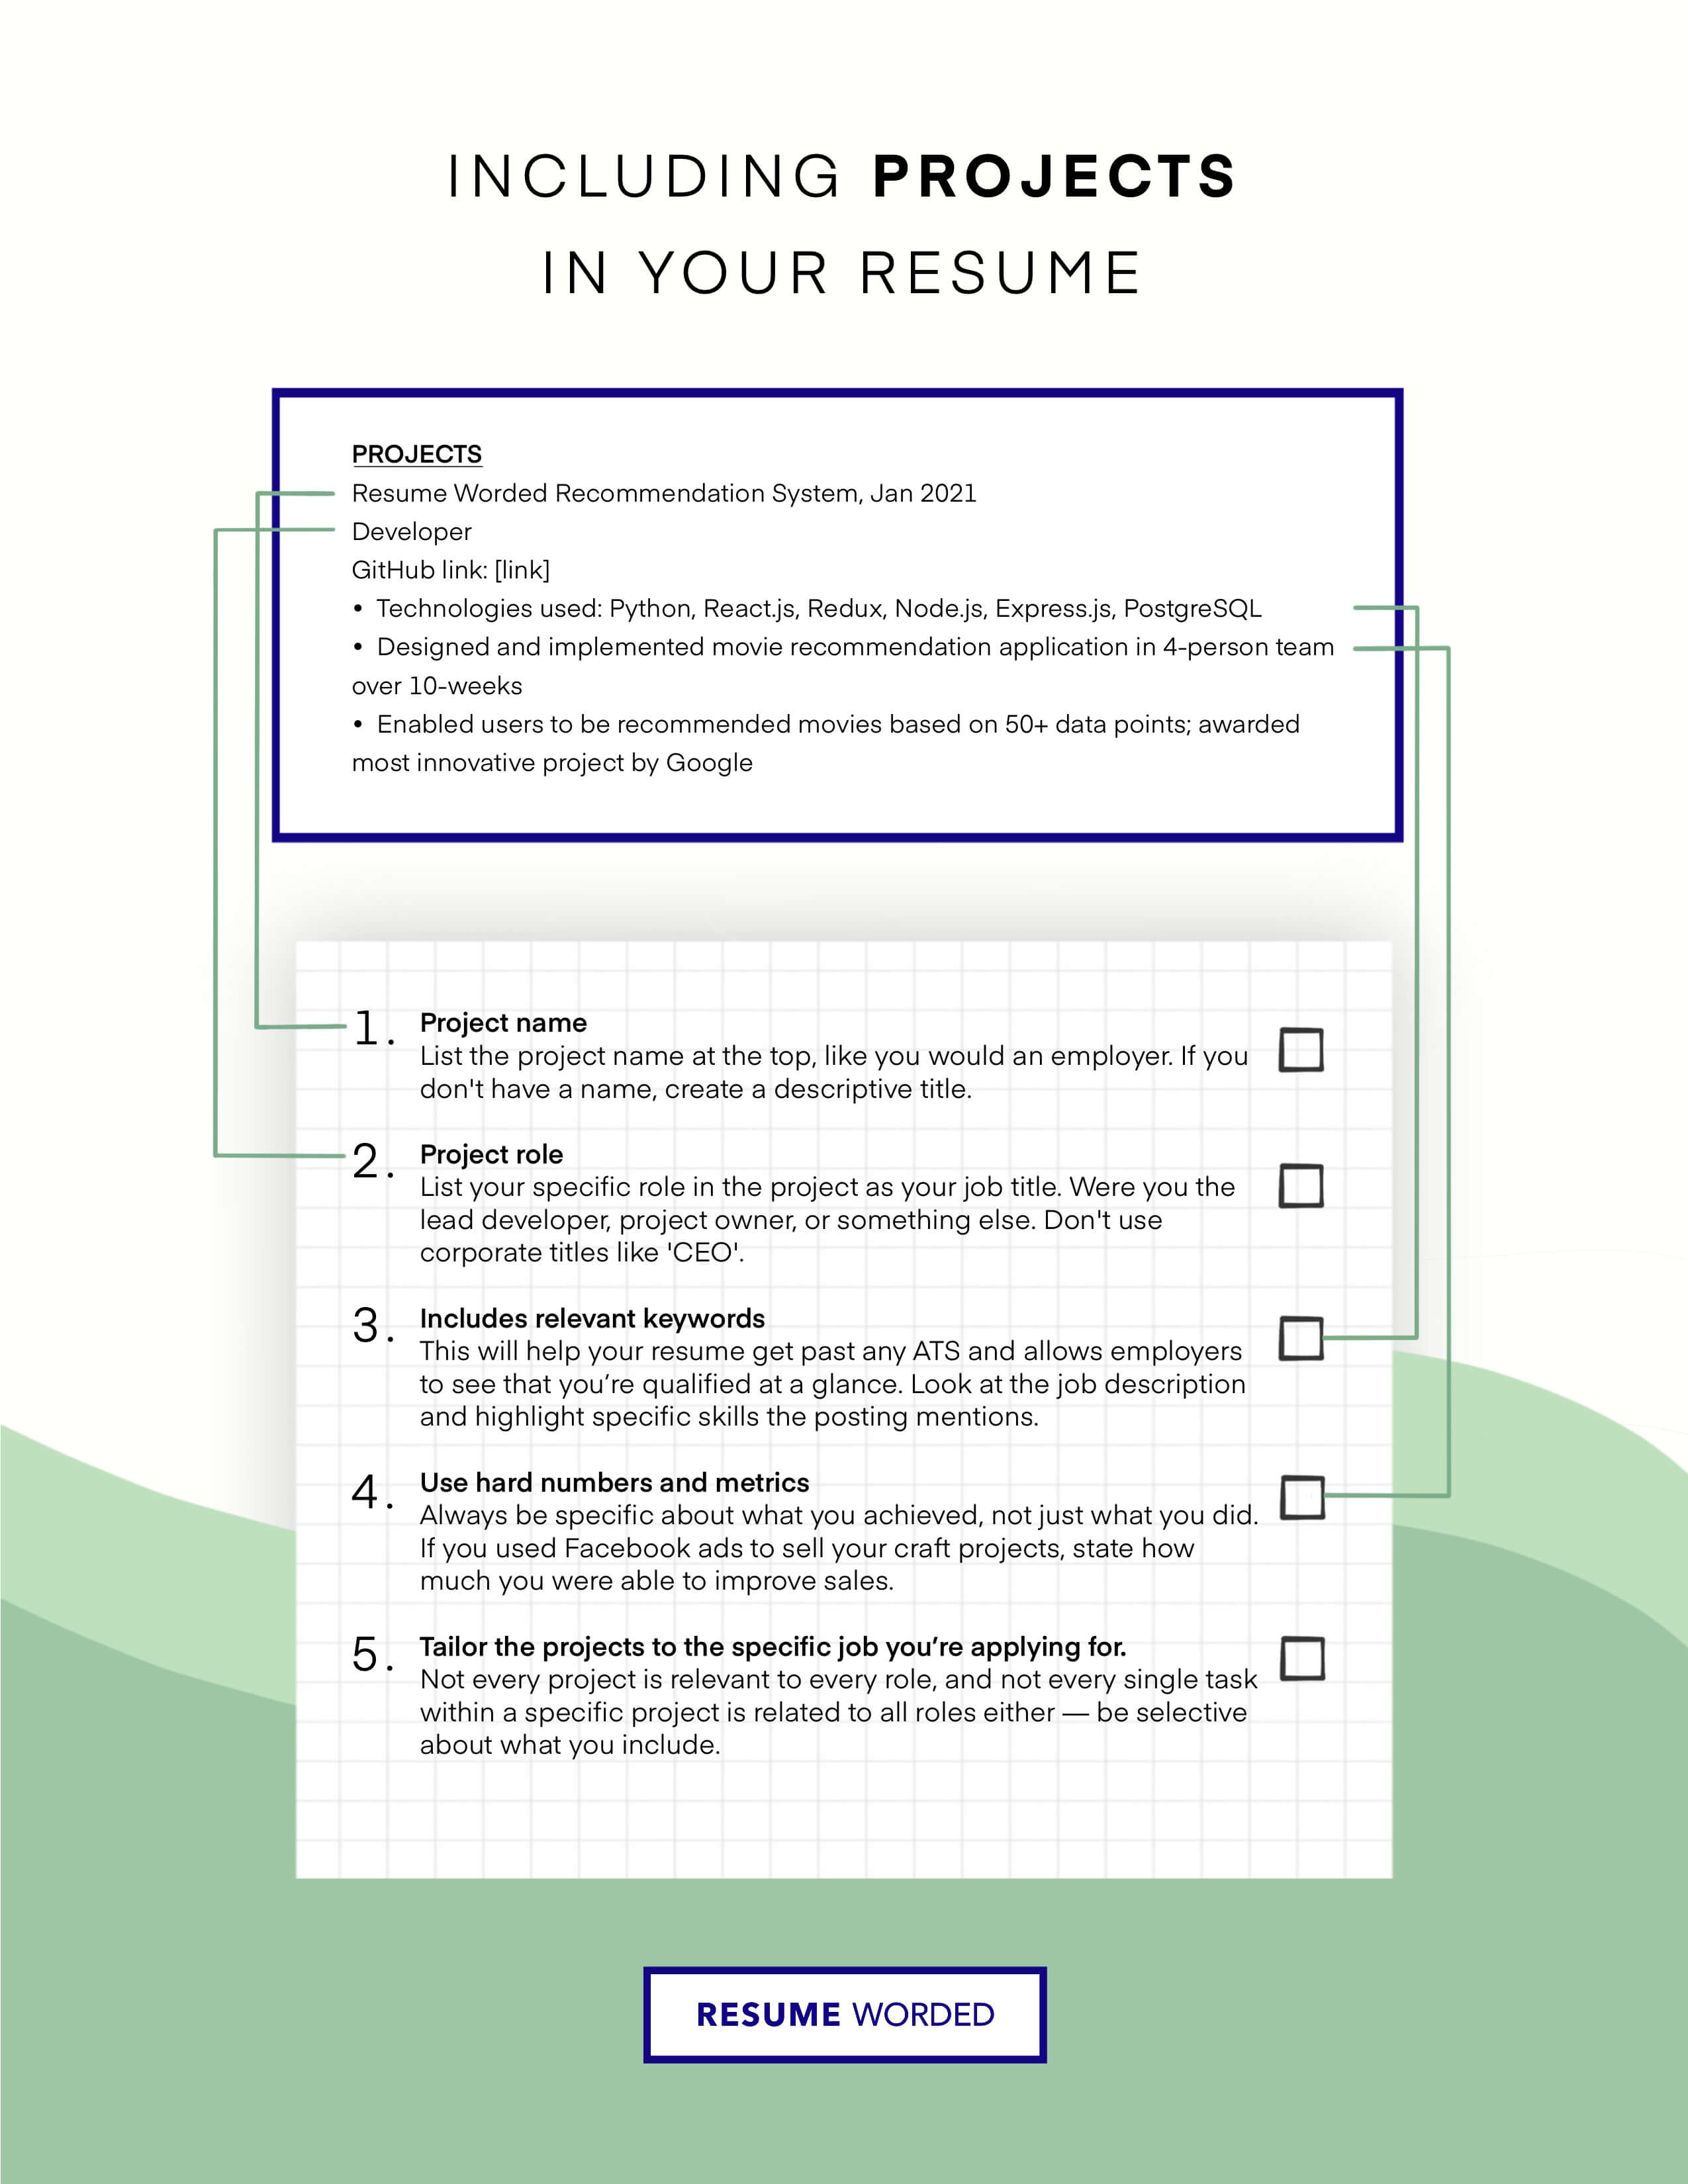 Include some of your recent and most outstanding cloud projects. - AWS Cloud Engineer Resume